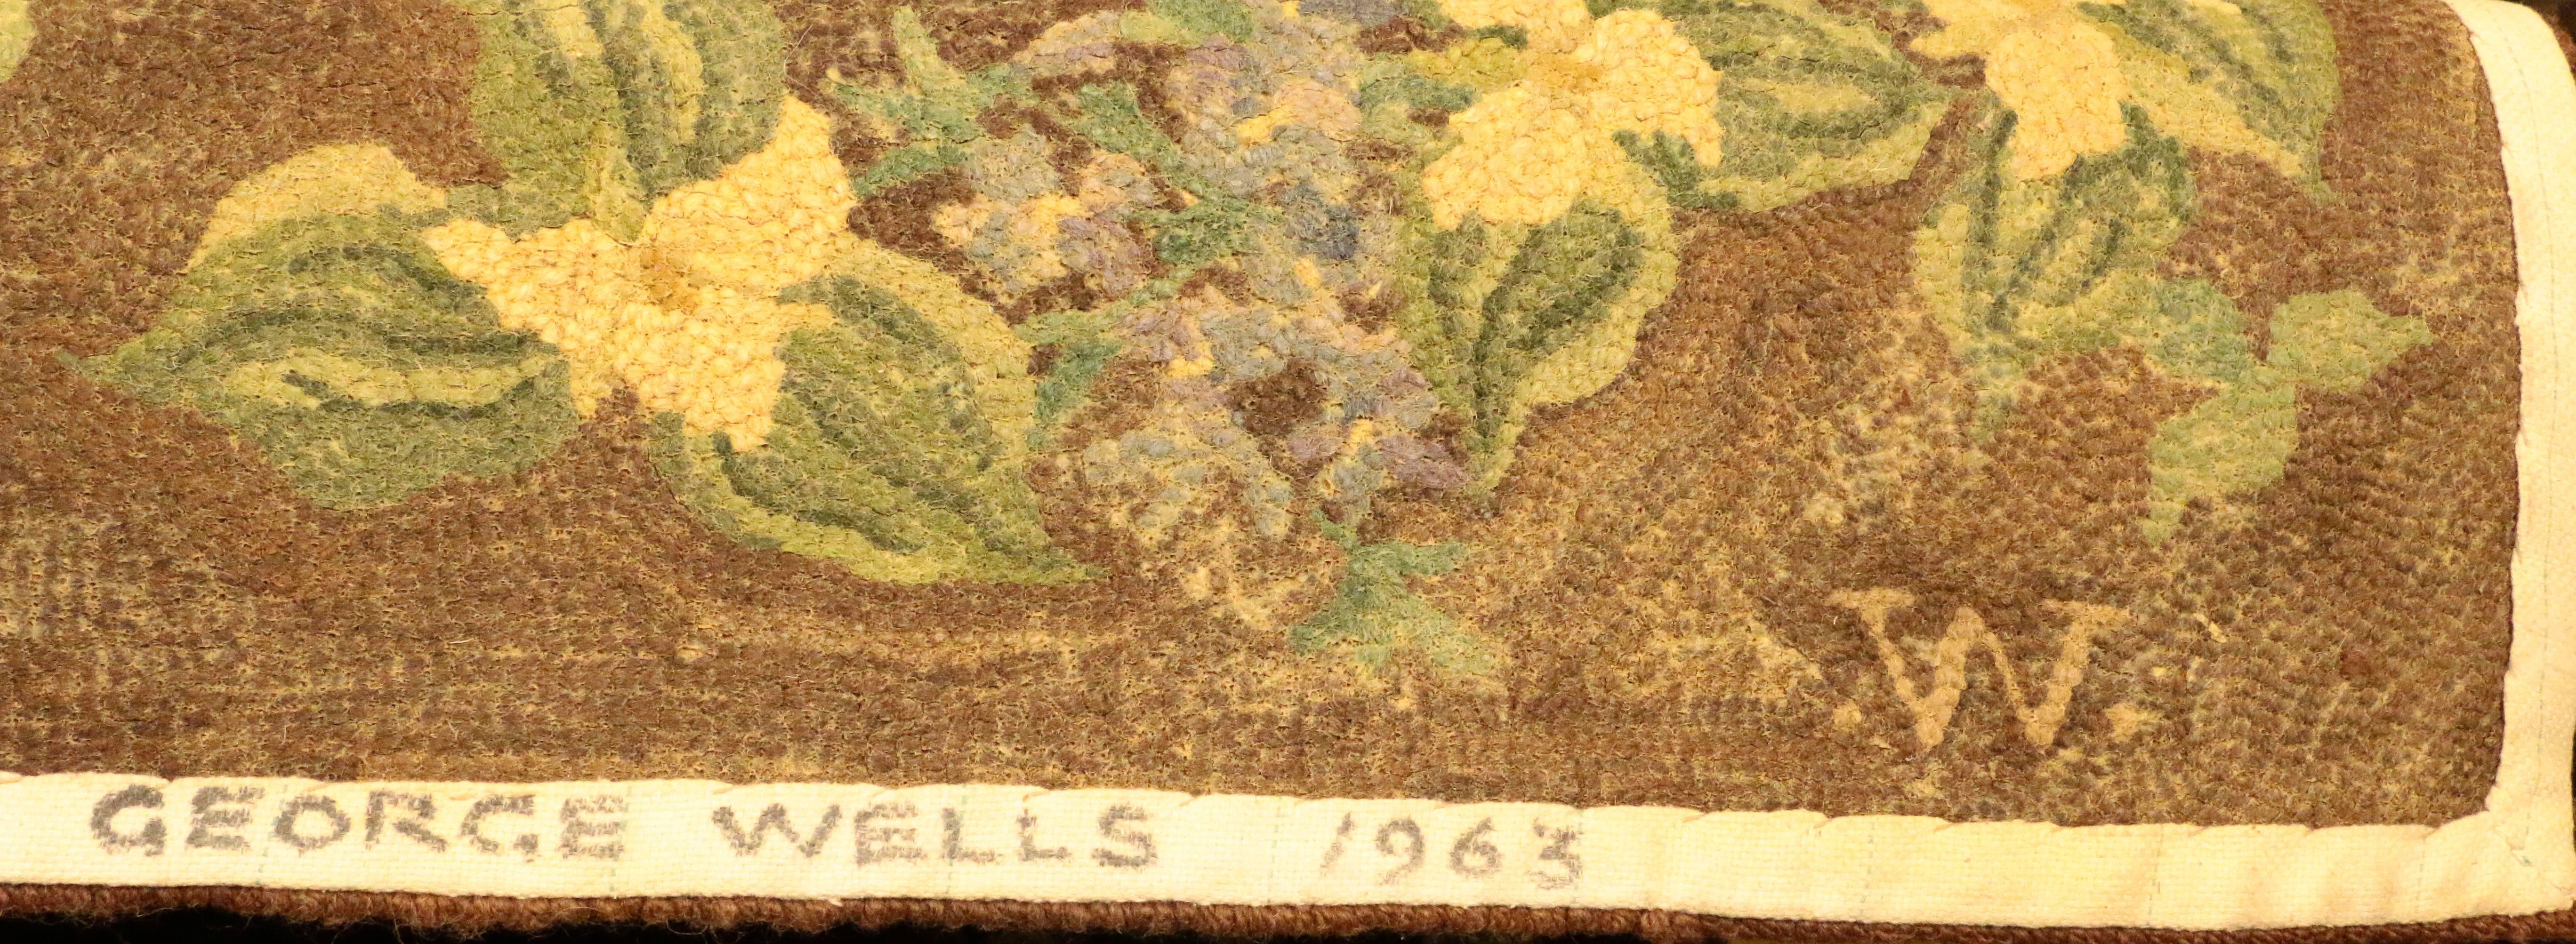 Mid-20th Century George Wells Hooked Rug For Sale